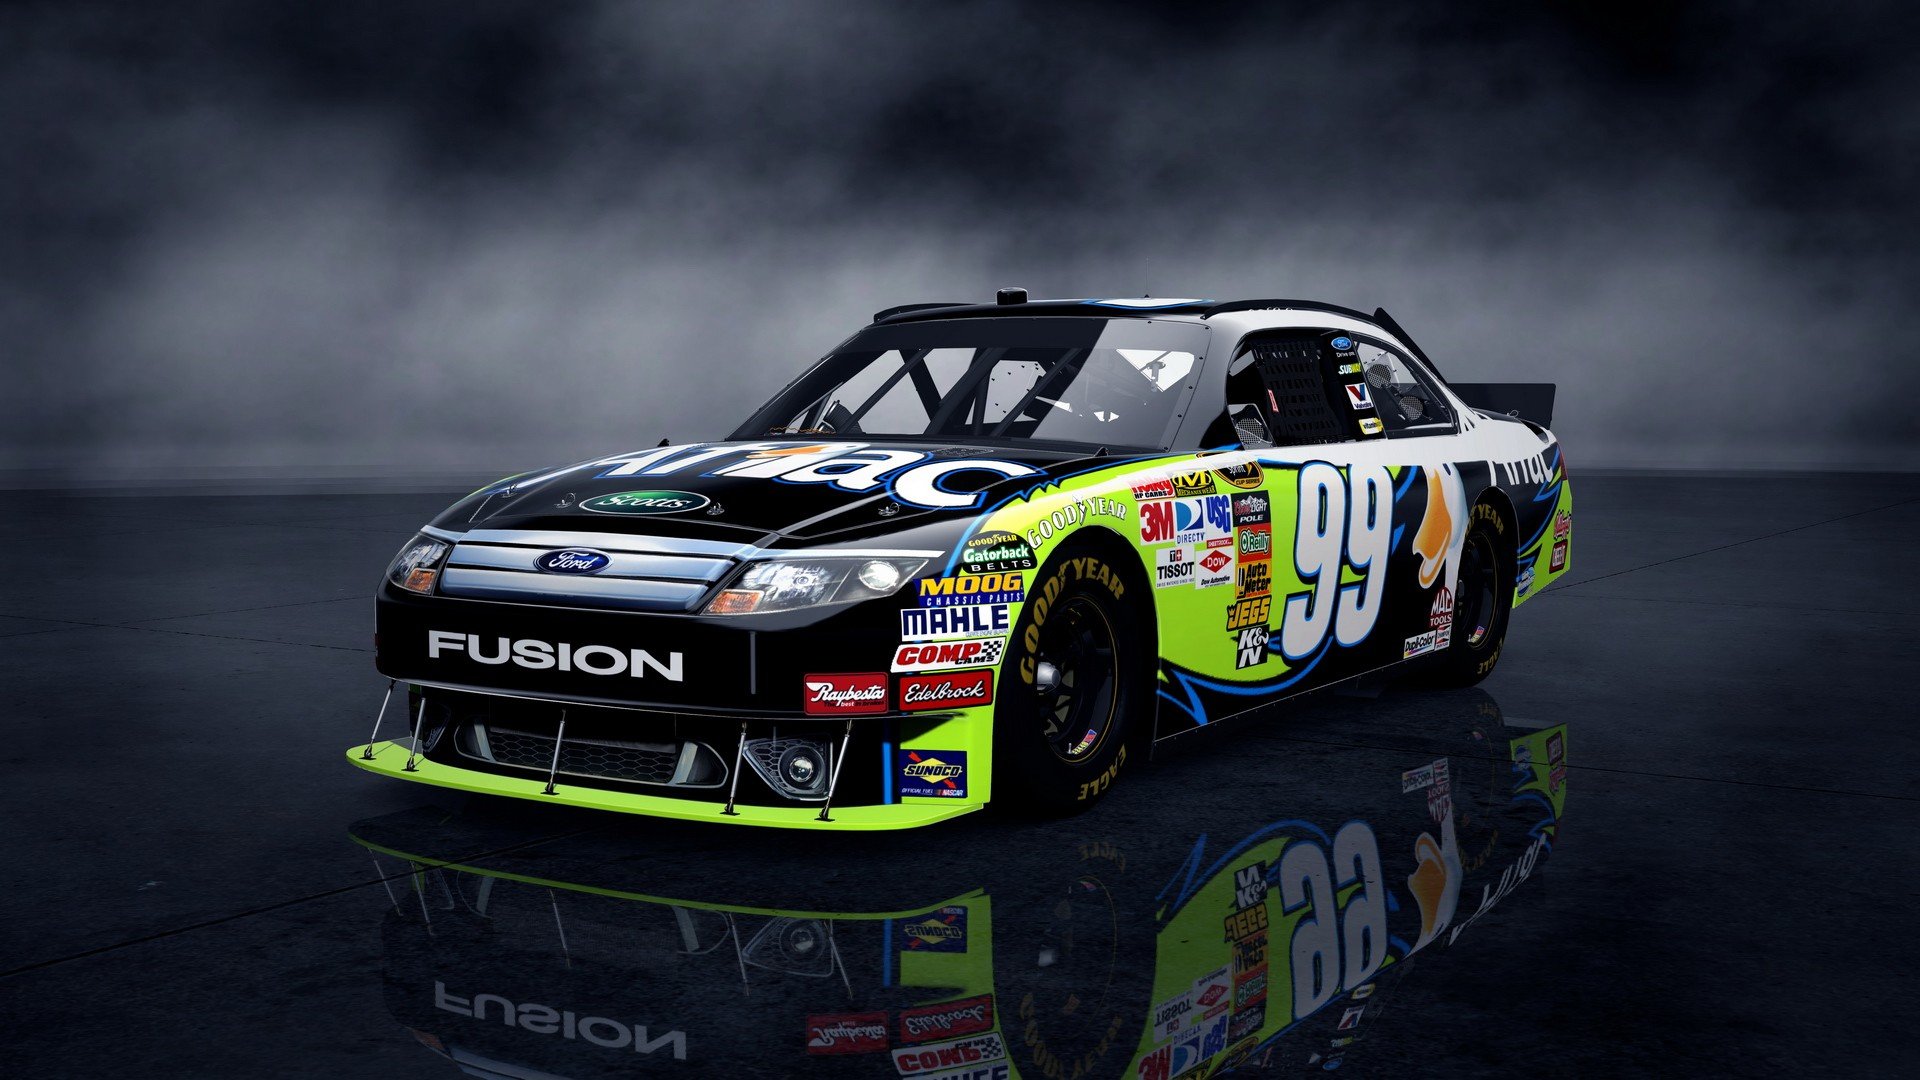 cars, Vehicles, Nascar, Wheels, Ford, Fusion, Automobiles Wallpaper